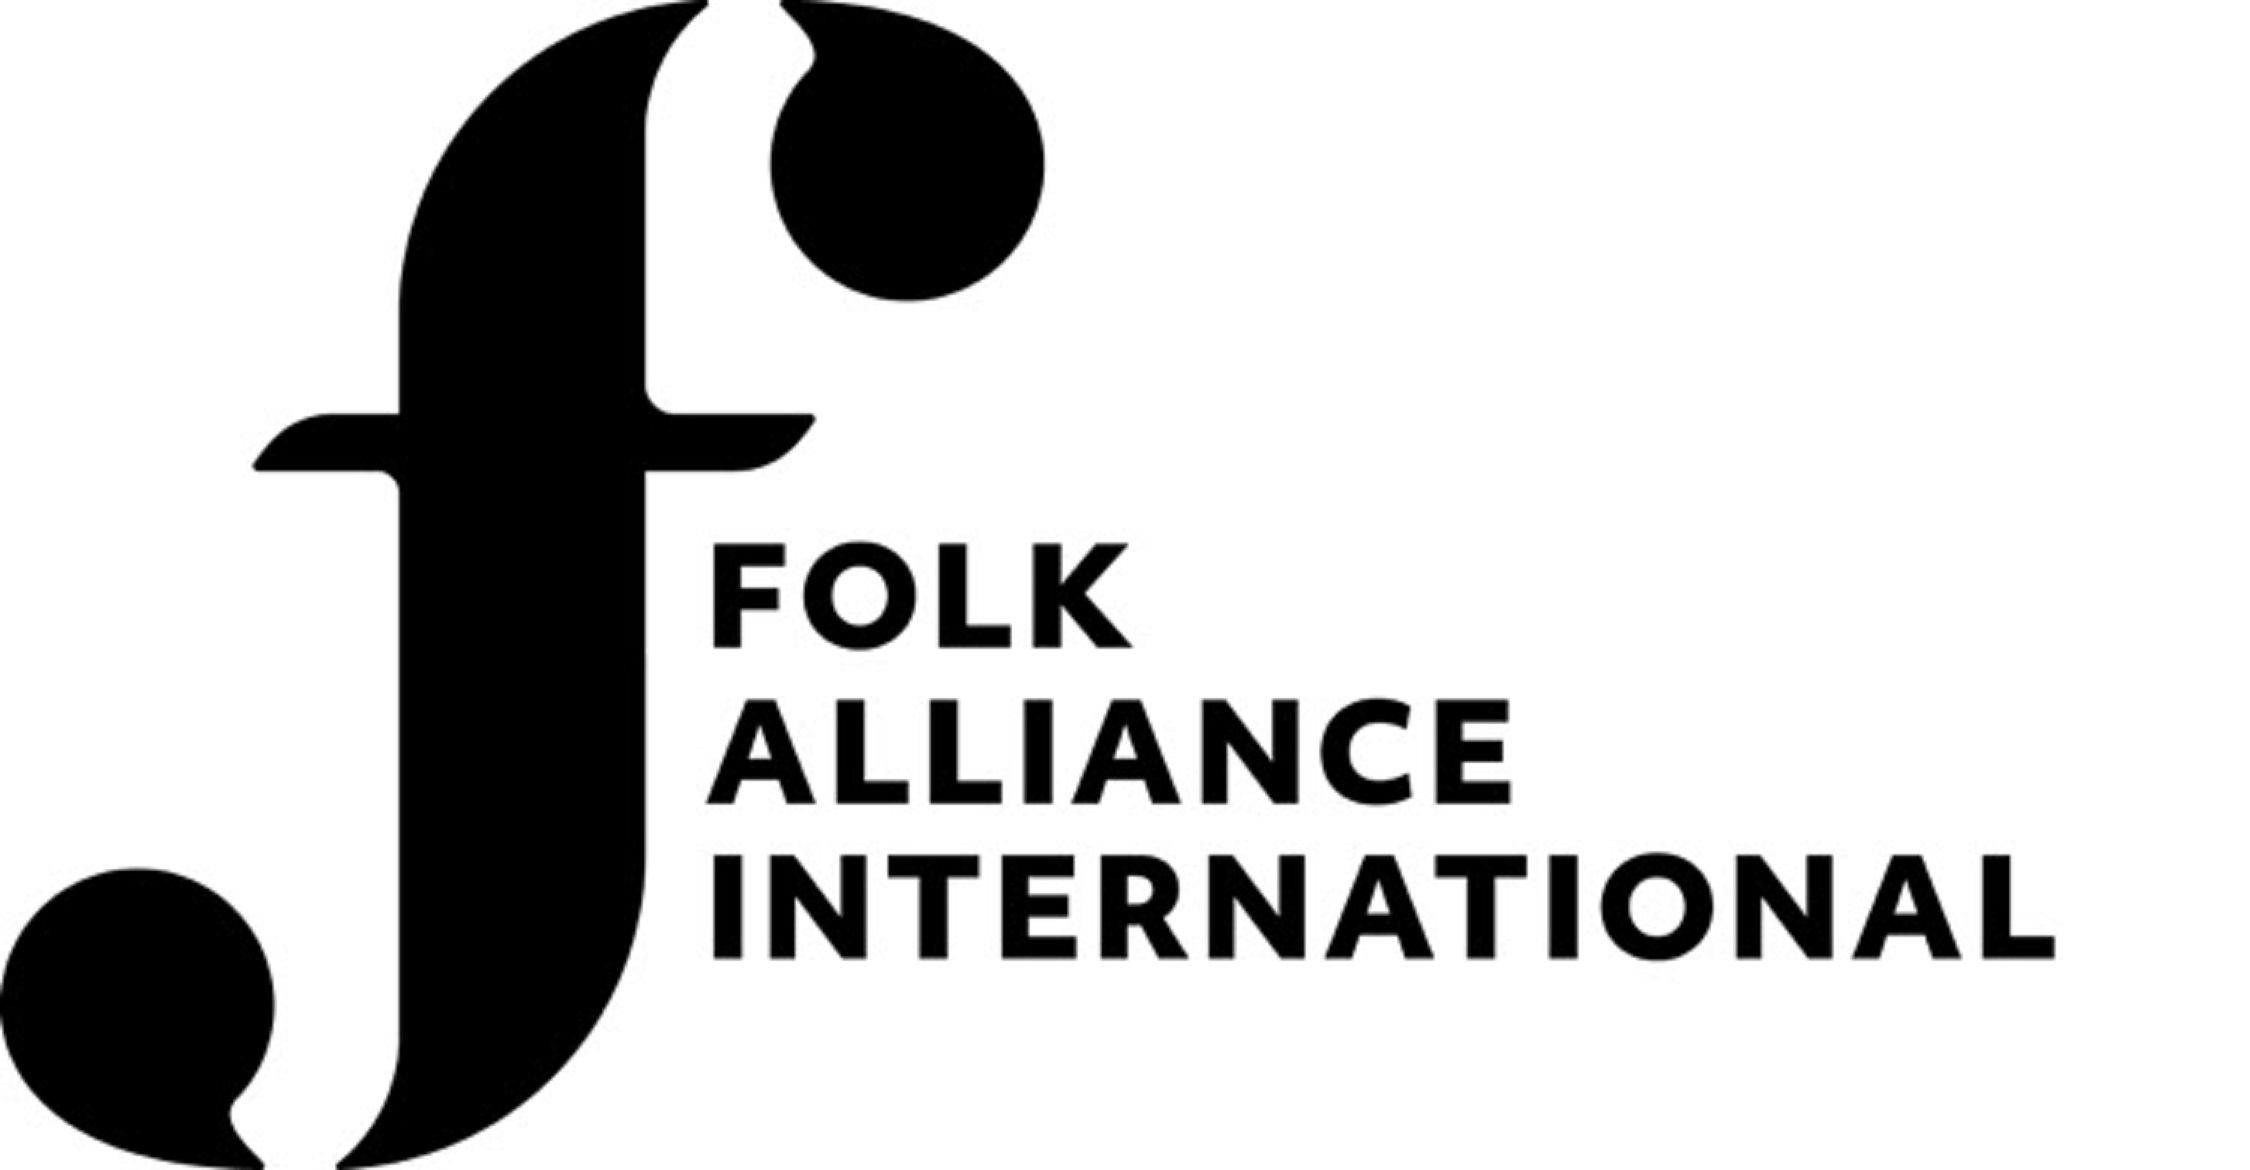 NPR To Live-Stream Folk Alliance Int'l's Int'l Folk Music Awards, Which Kick Off 36th Conference